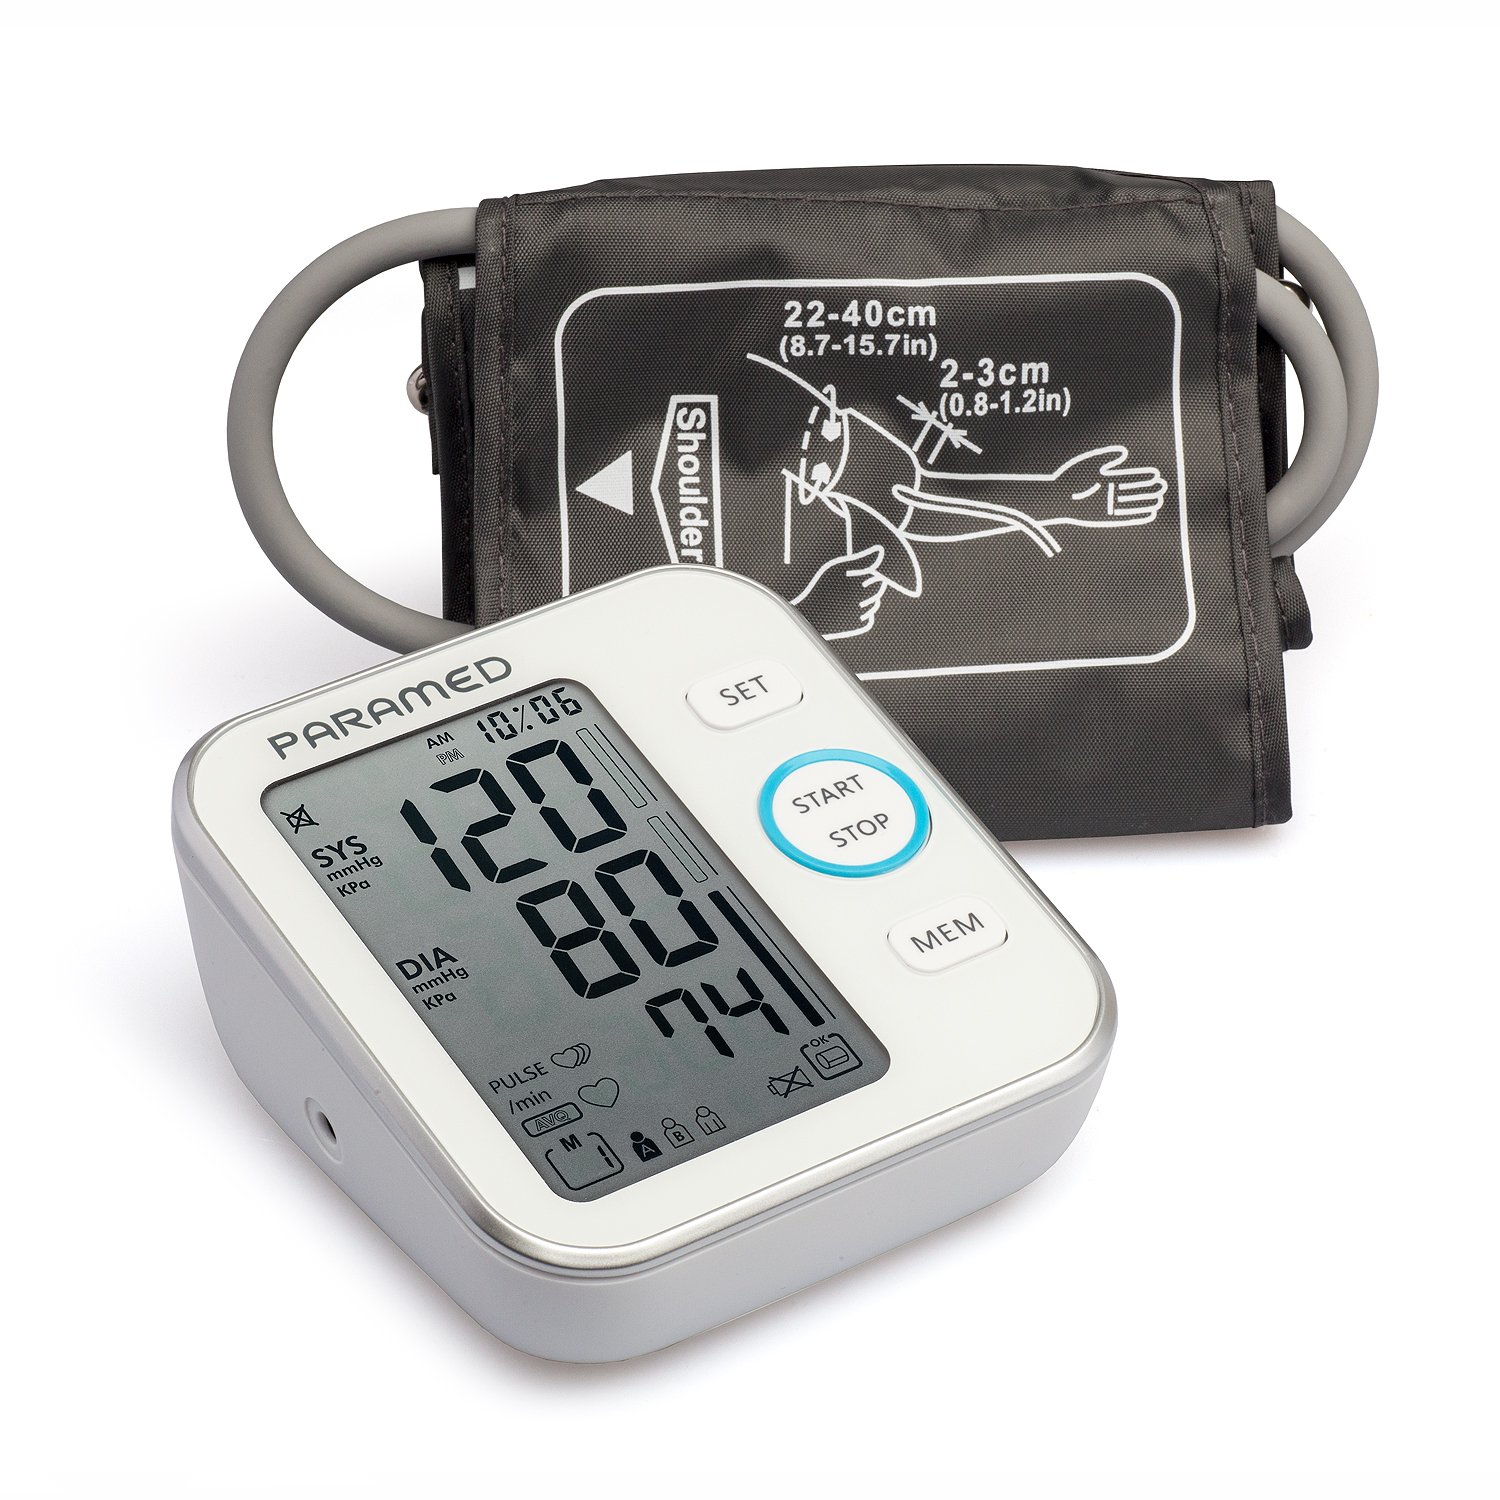 Paramed Automatic Upper Arm Blood Pressure Monitor